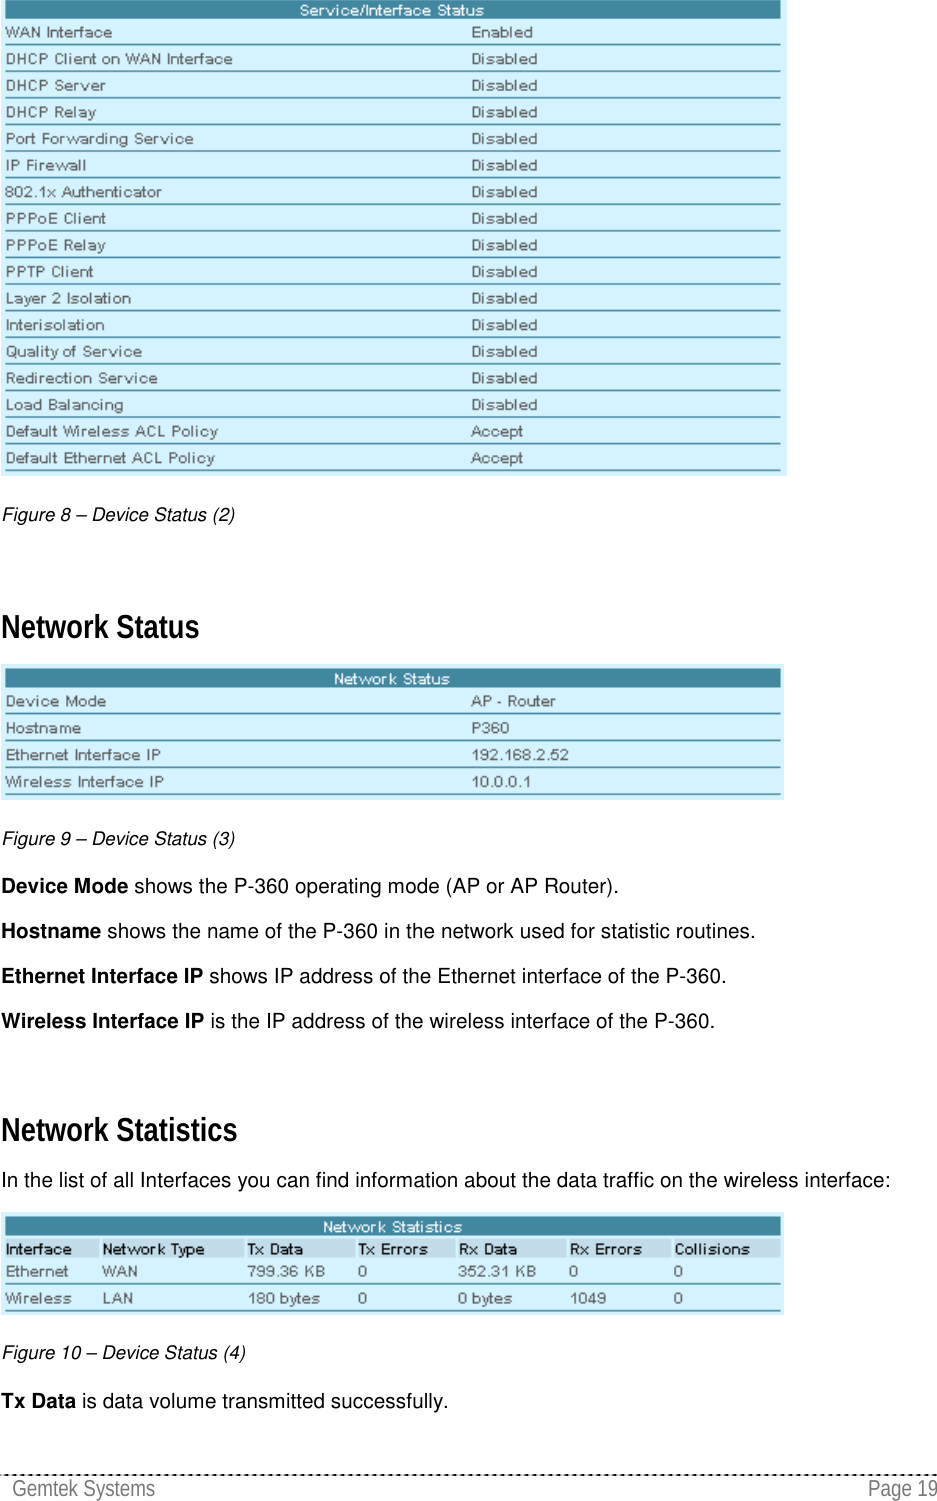 Gemtek Systems Page 19Figure 8 – Device Status (2)Network StatusFigure 9 – Device Status (3)Device Mode shows the P-360 operating mode (AP or AP Router).Hostname shows the name of the P-360 in the network used for statistic routines.Ethernet Interface IP shows IP address of the Ethernet interface of the P-360.Wireless Interface IP is the IP address of the wireless interface of the P-360.Network StatisticsIn the list of all Interfaces you can find information about the data traffic on the wireless interface:Figure 10 – Device Status (4)Tx Data is data volume transmitted successfully.